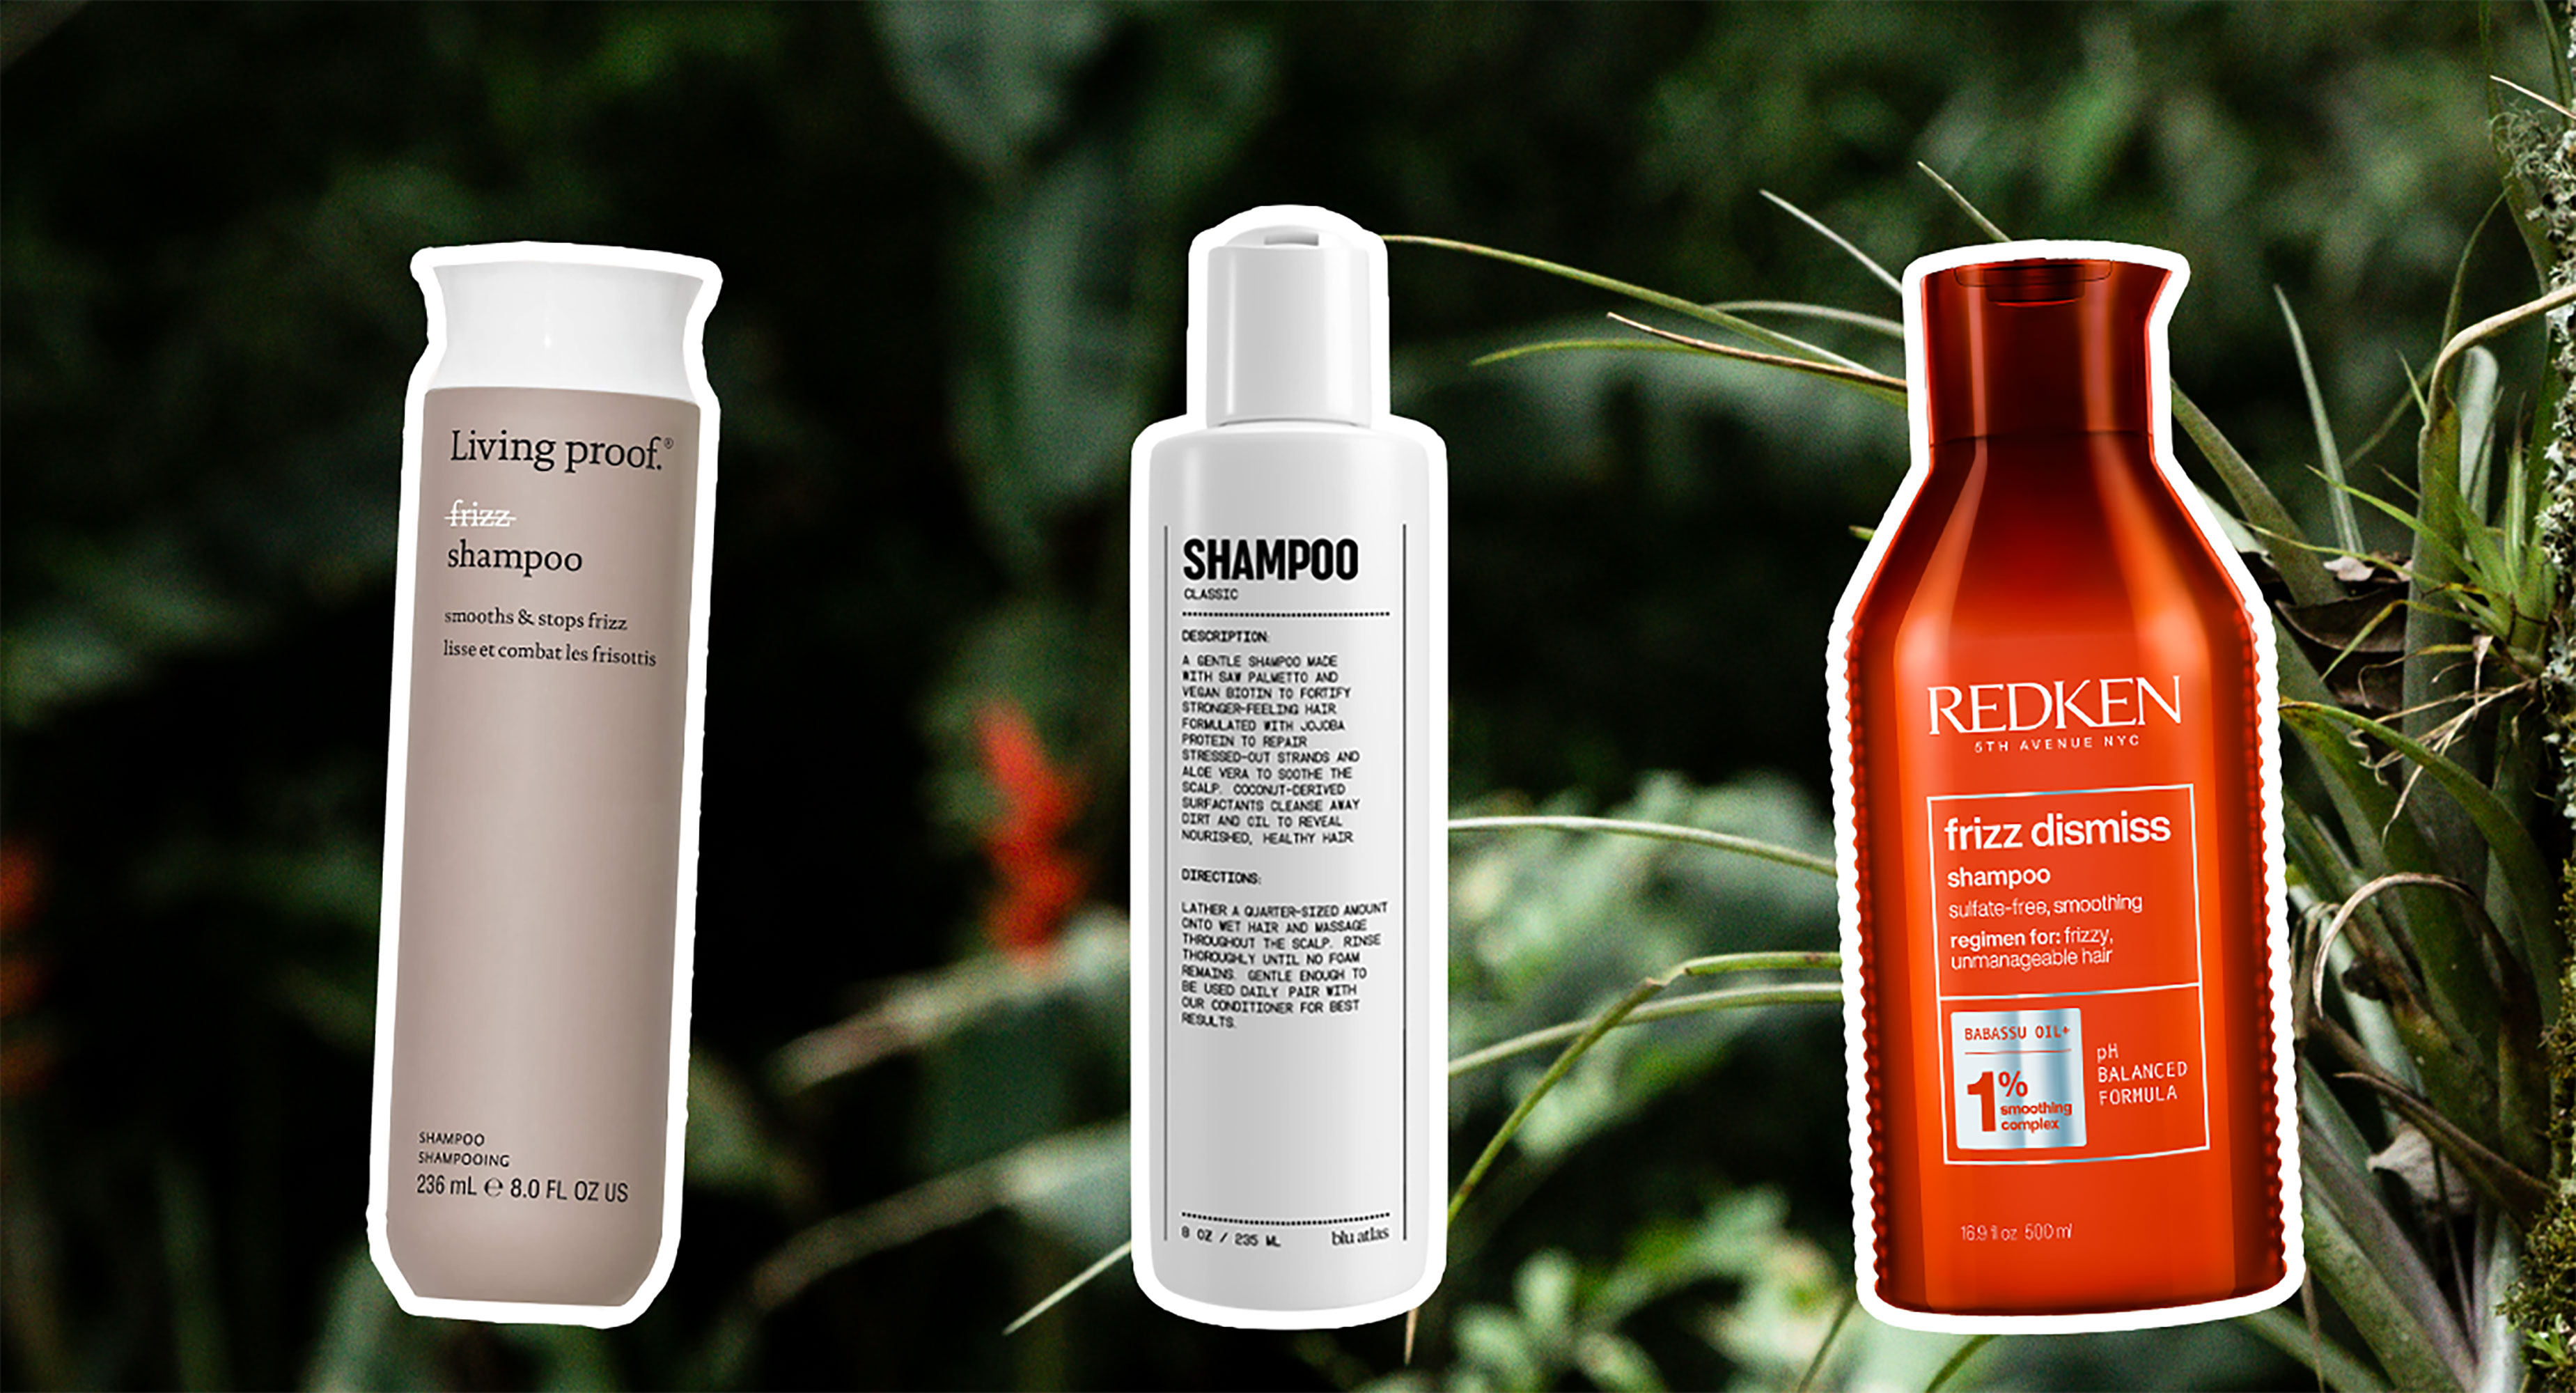 bluse eksplodere springvand 9 Best Shampoos for Frizzy Hair in 202